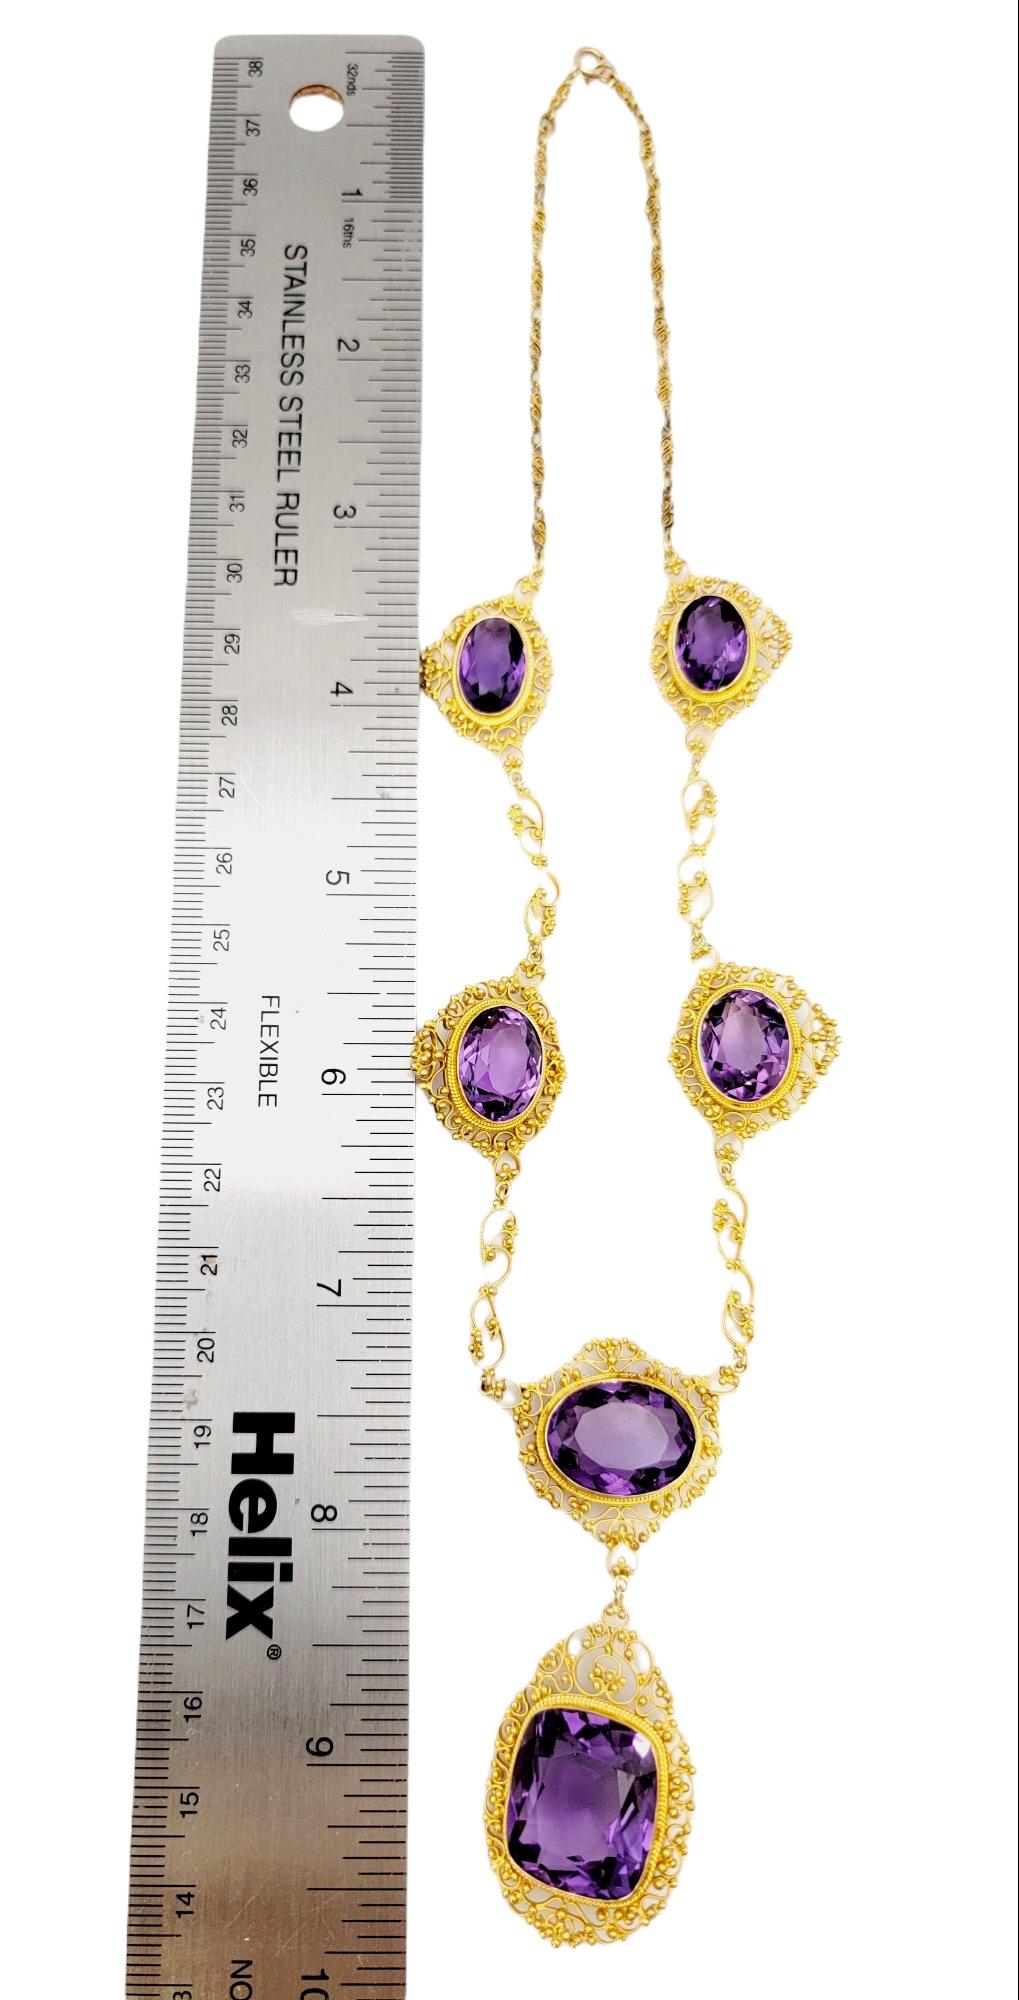 48.48 Carat Cushion and Oval Cut Amethyst Station Drop Necklace in 21 Karat Gold 3